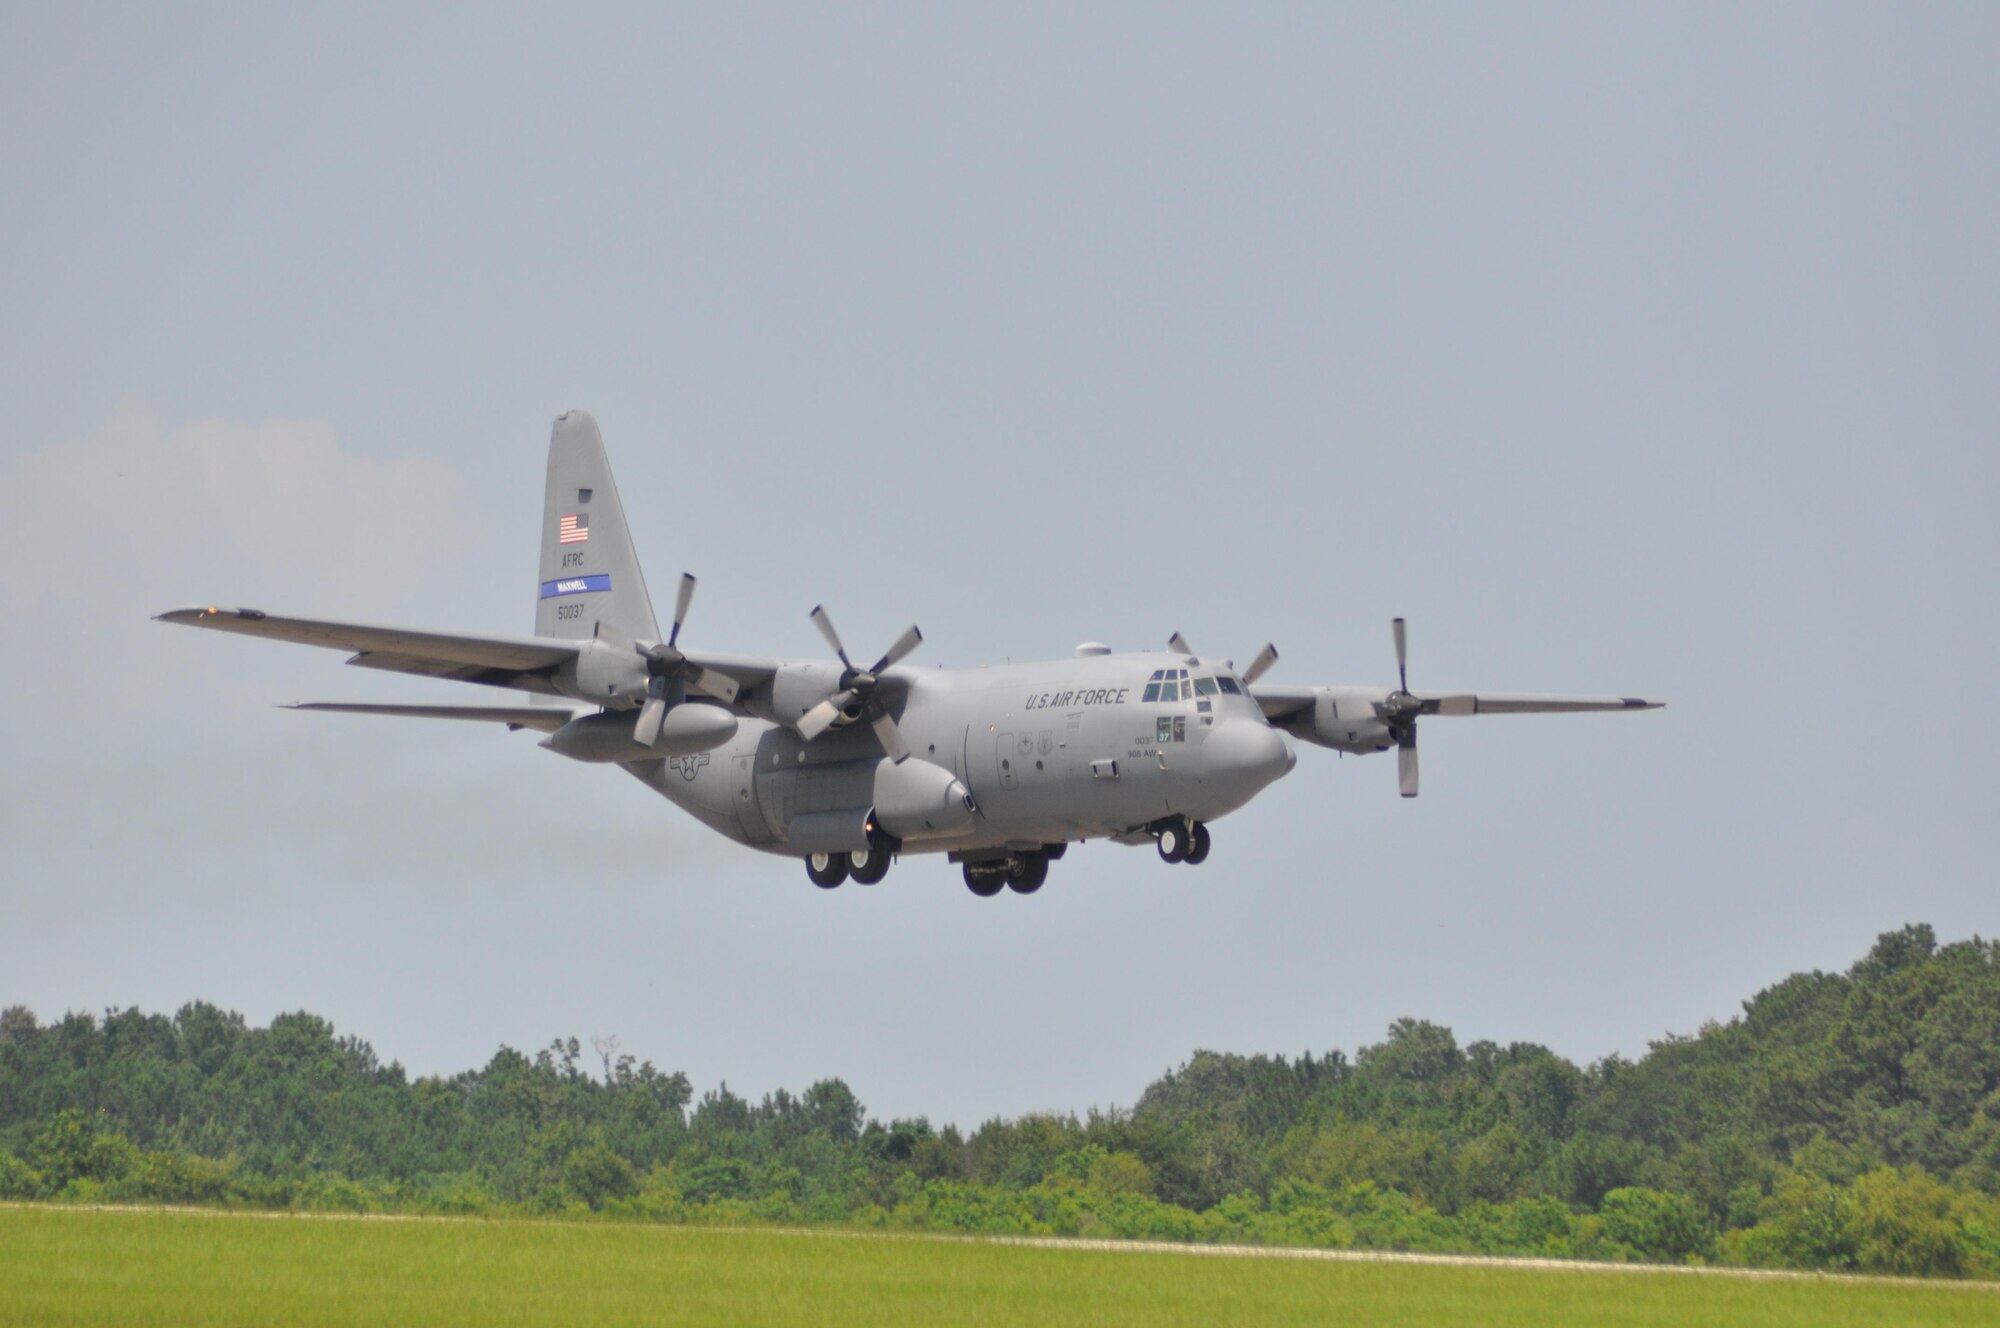 One of the 908th Airlift Wing's eight C-130 Hercules takes off at Maxwell Air Force Base. (U.S. Air Force photo by Lt. Col. Jerry Lobb)